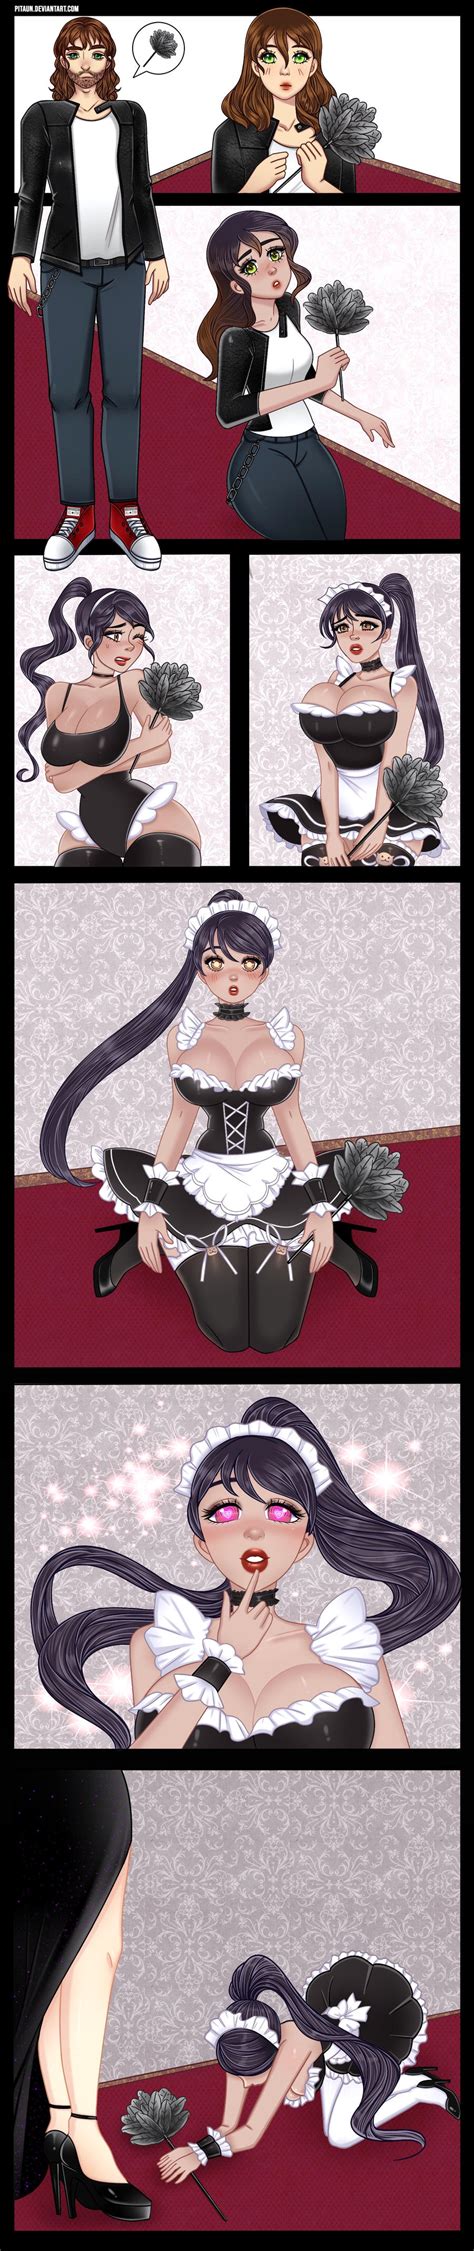 Comic Cmsn Maid Submission By Pitaun On Deviantart